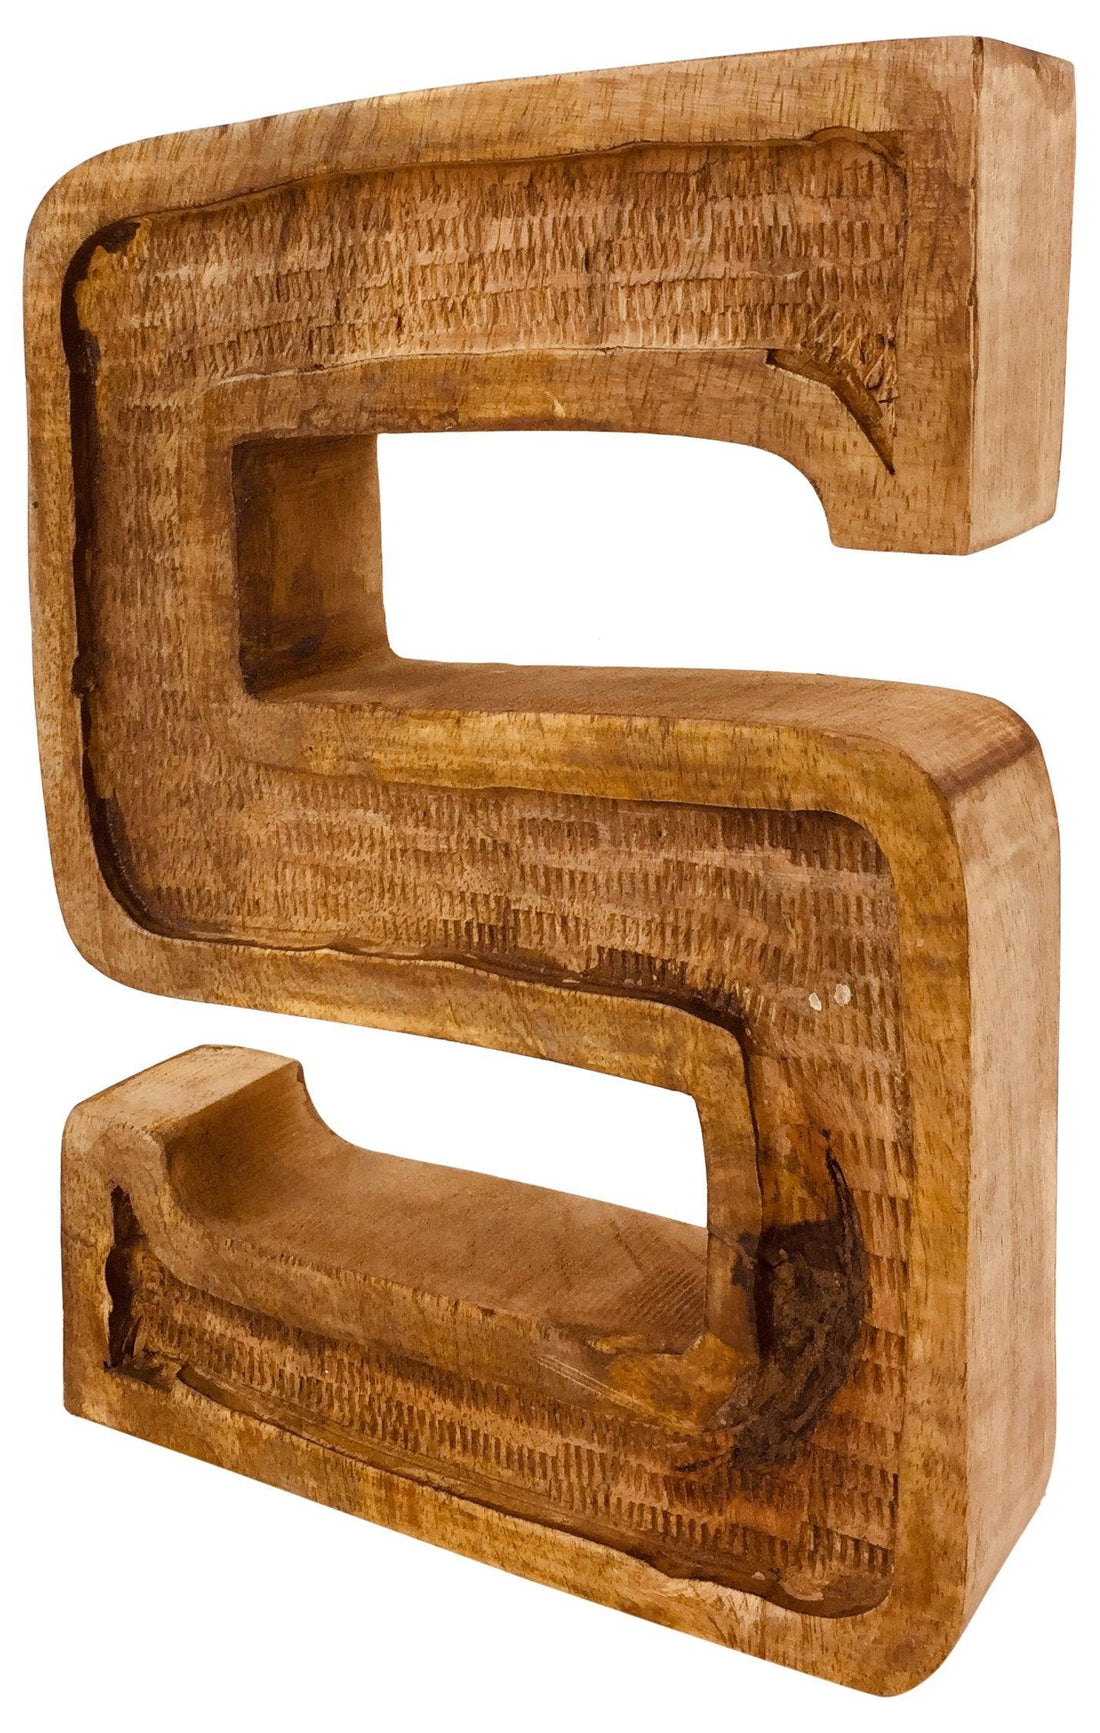 Hand Carved Wooden Embossed Letter S - £18.99 - Single Letters 